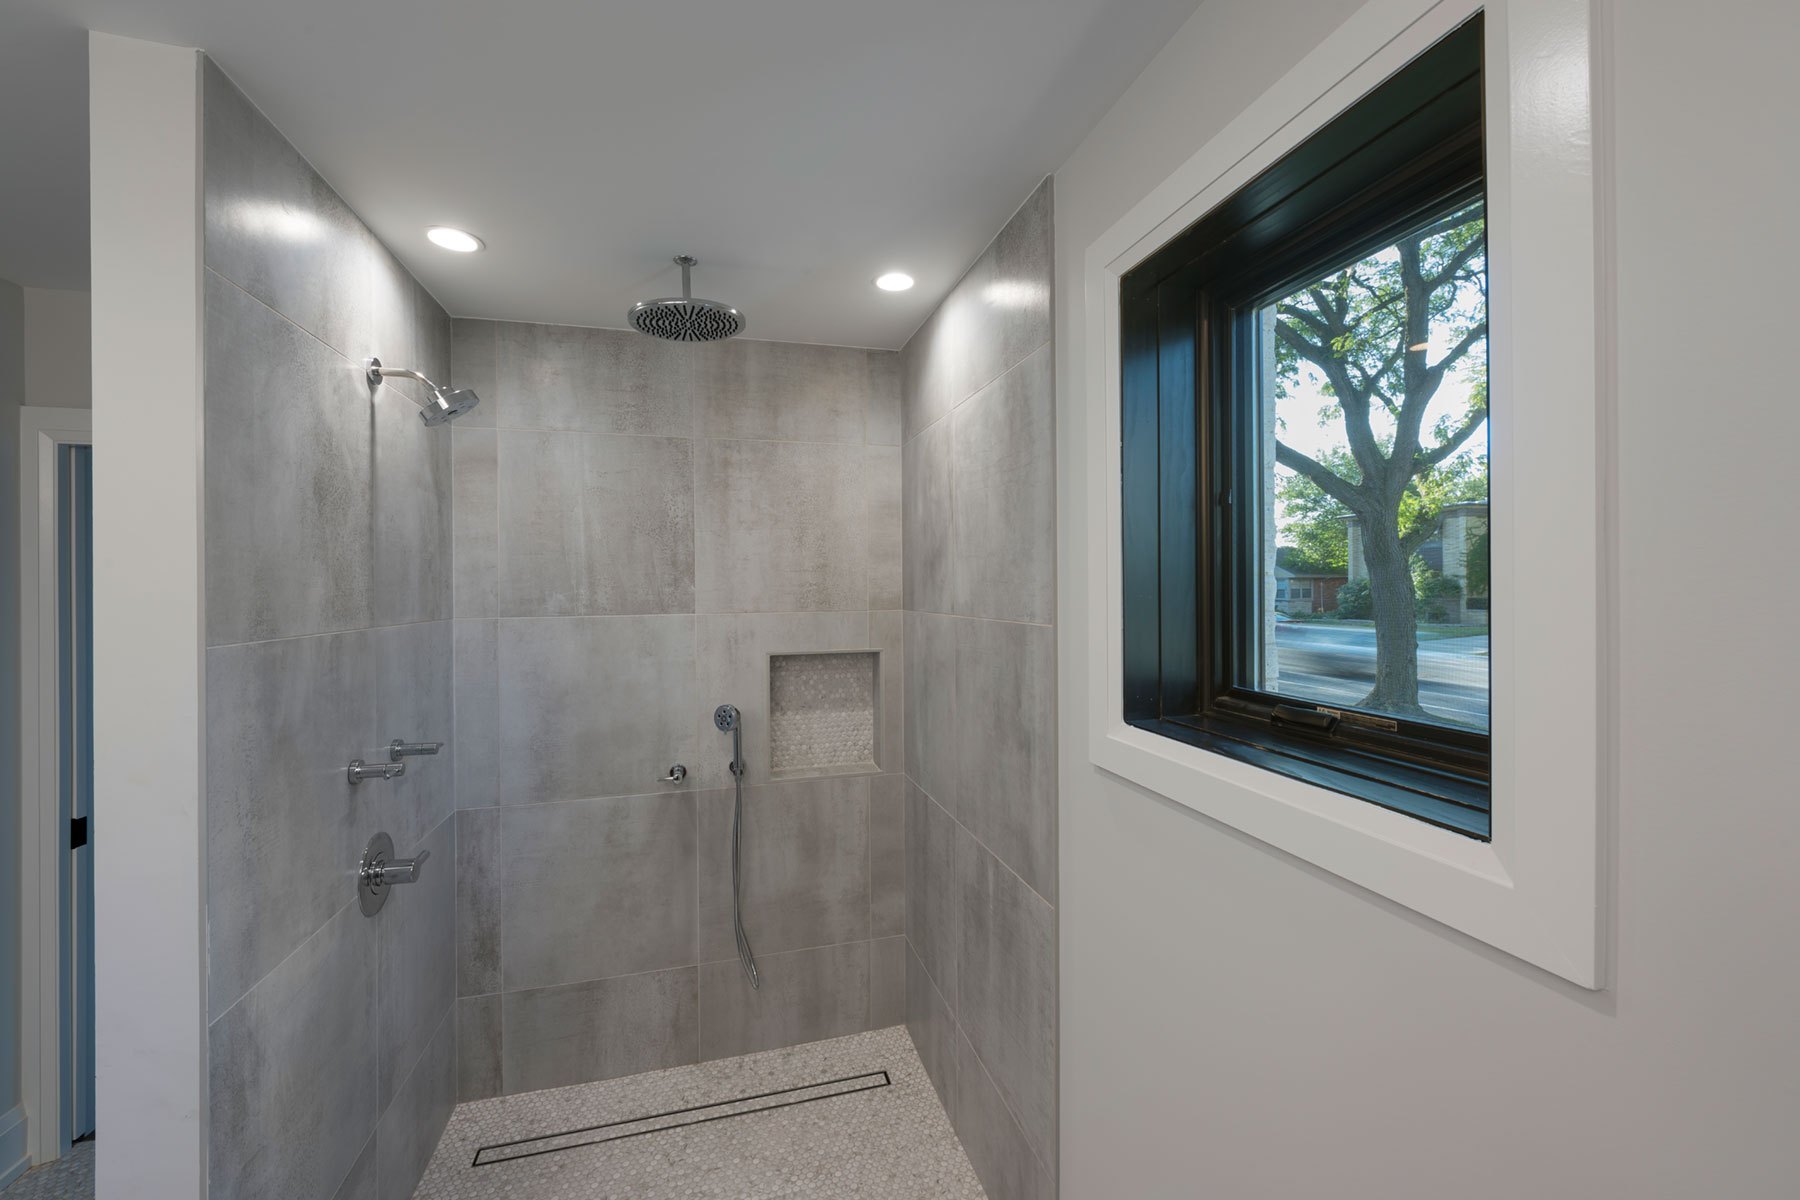 1st Floor Master Bathroom - N. Francisco Ave., Chicago, IL Custom Home. America's Custom Home Builders: New Construction, Remodeling, Restoration Services. Residential and Commercial.